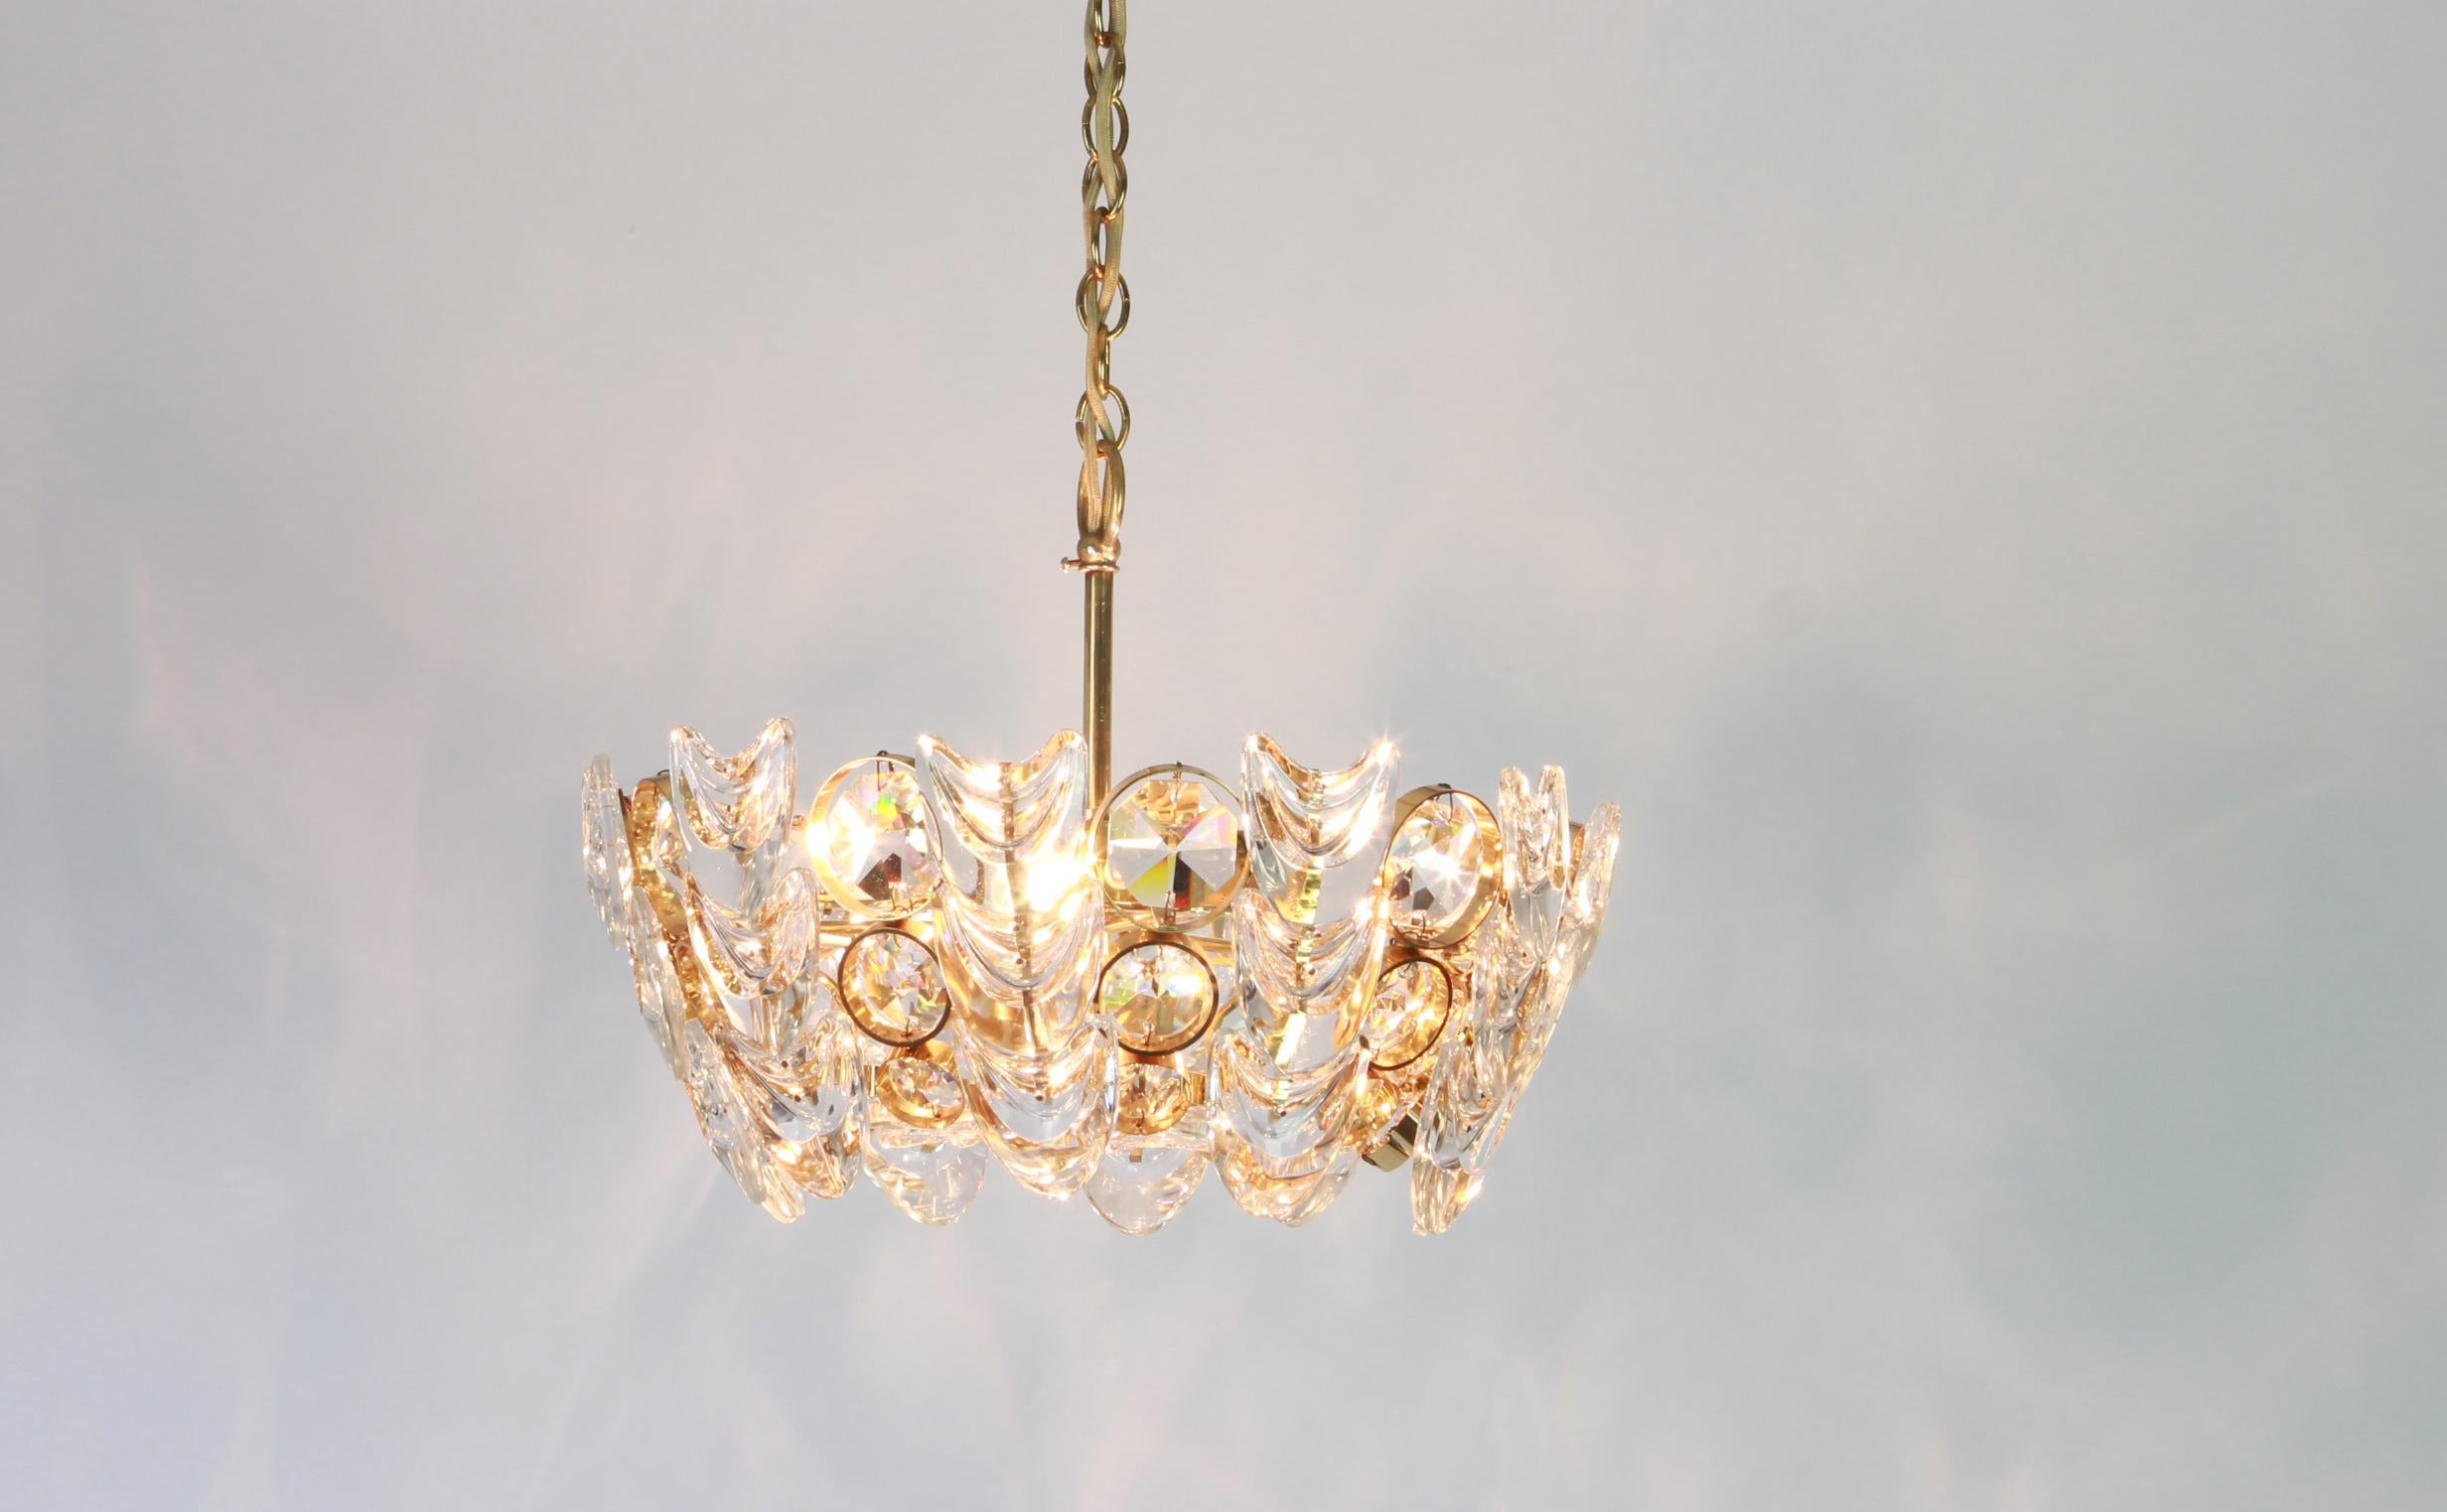 Mid-Century Modern Petite Gilt Brass and Crystal Glass Encrusted Chandelier by Palwa, Germany 1970s For Sale